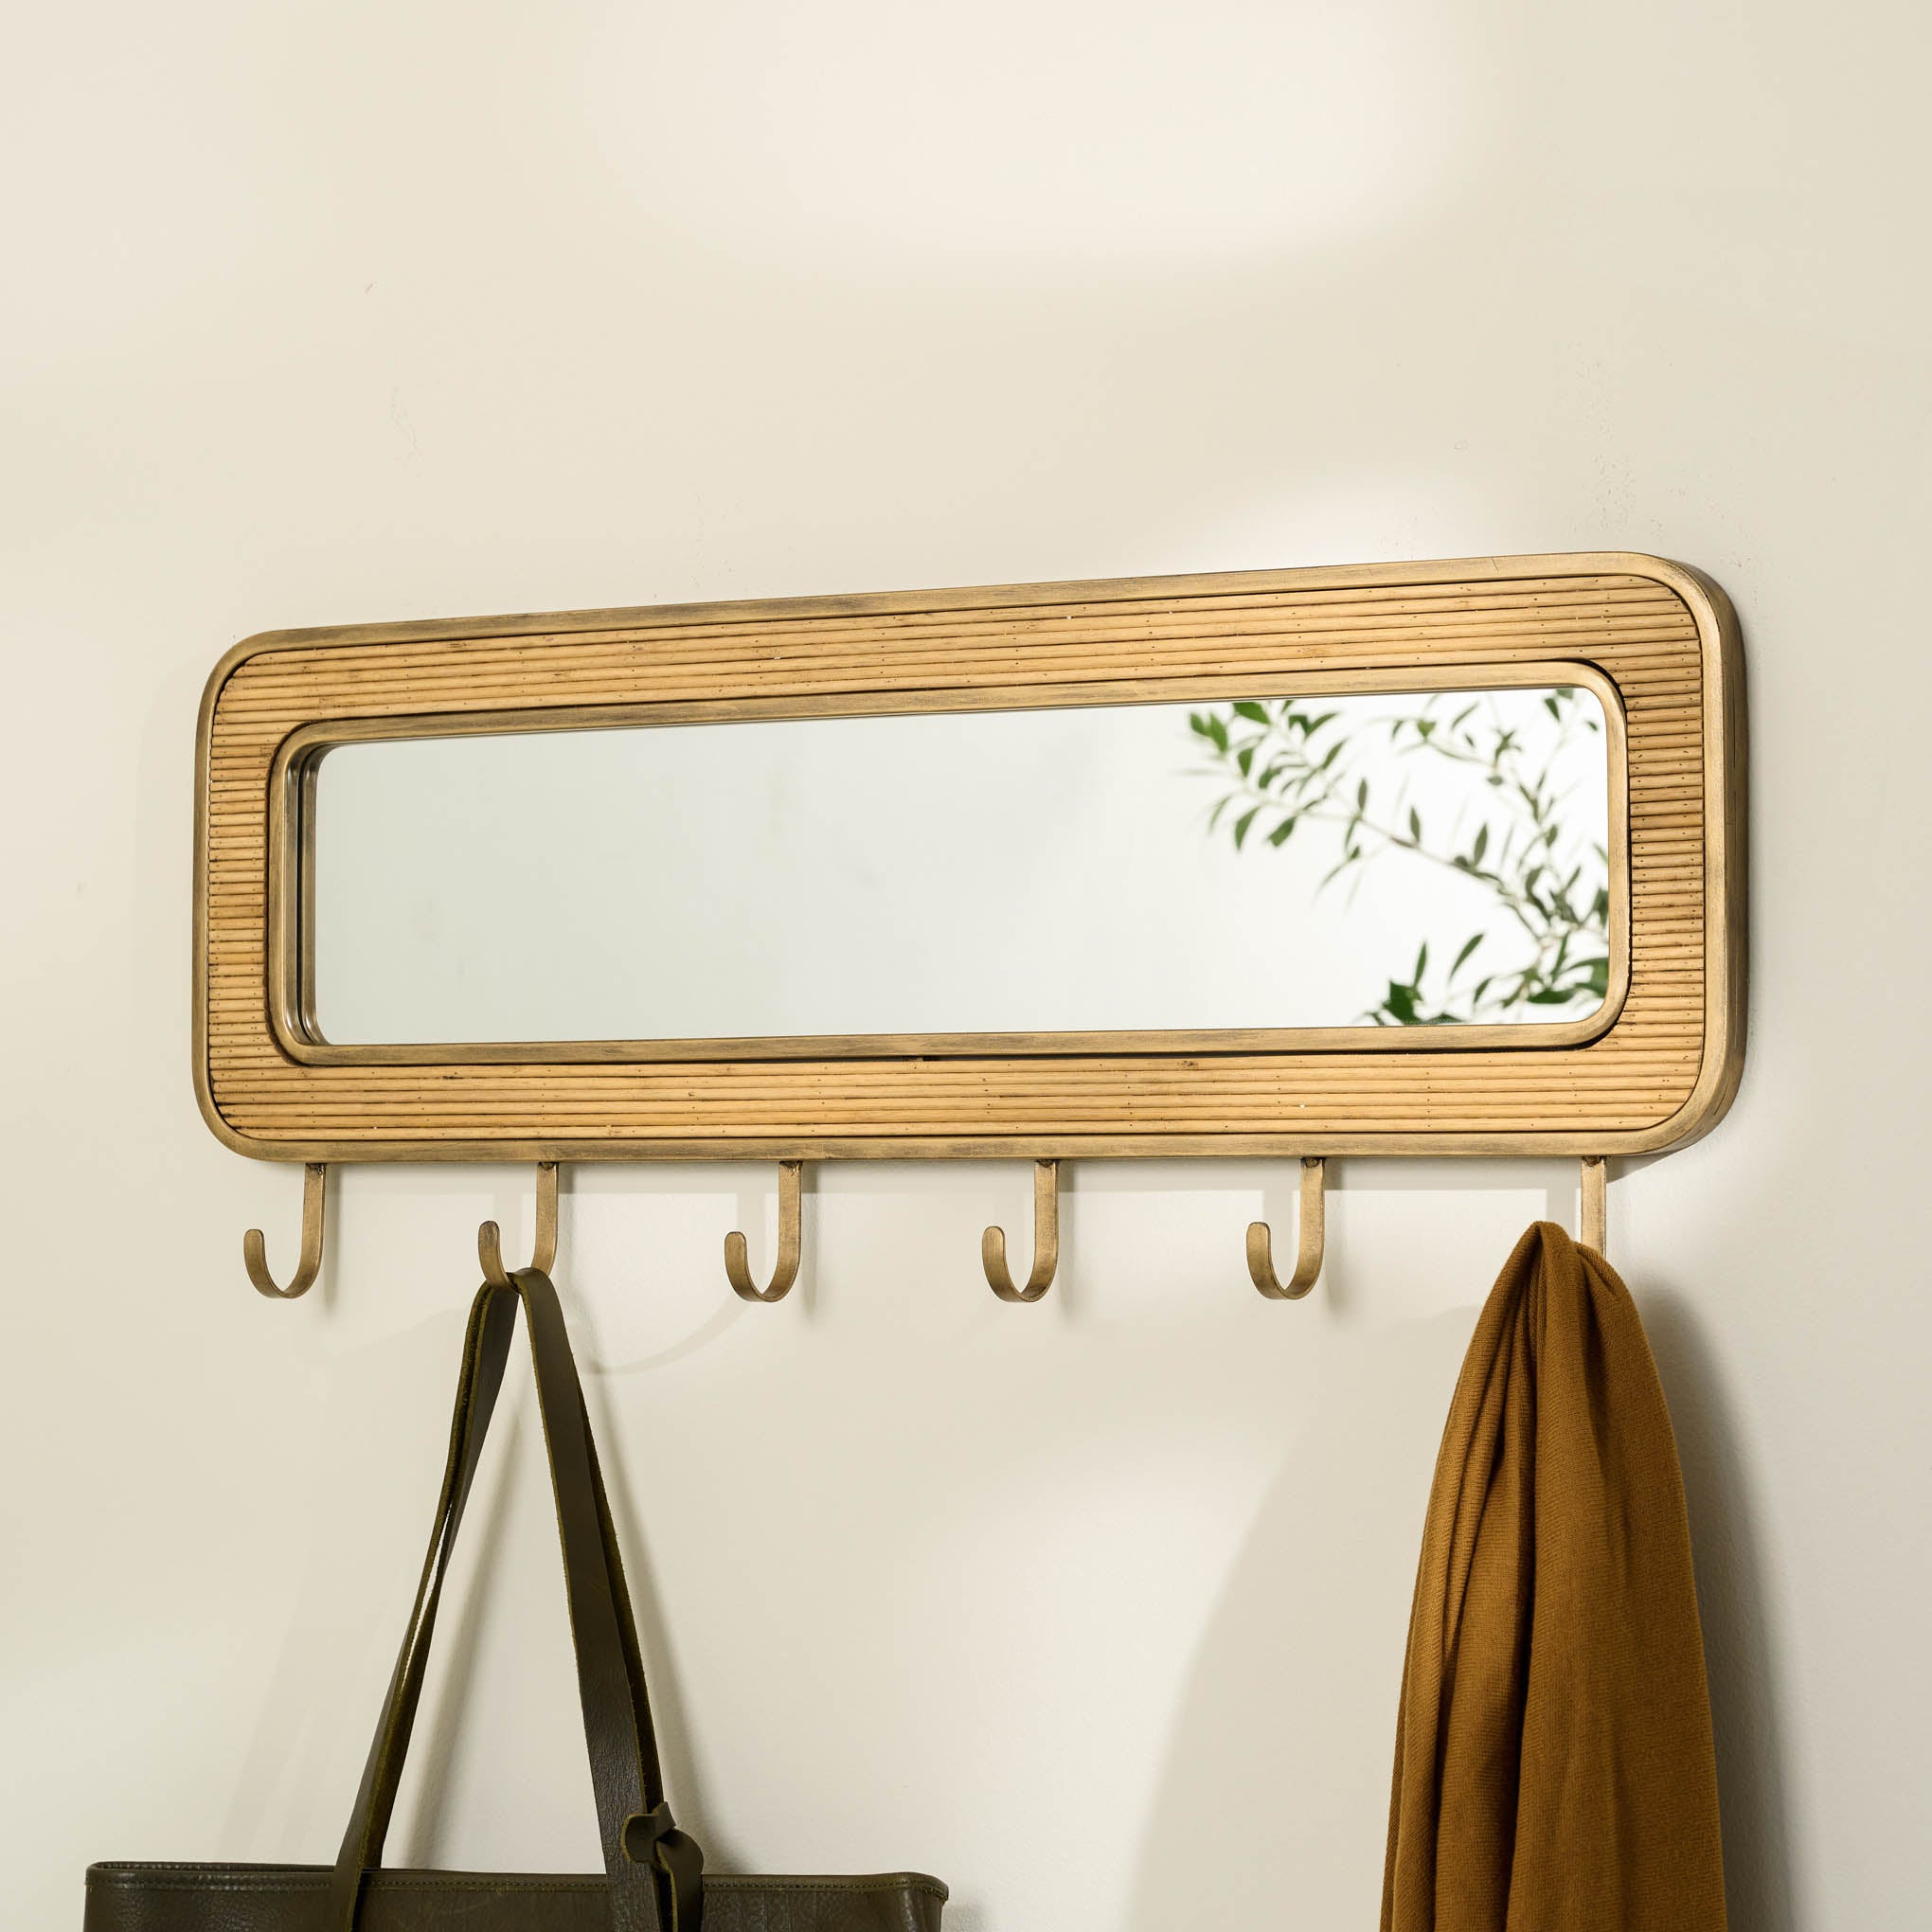 Antique Brass and Bamboo Mirror with Hooks - Magnolia